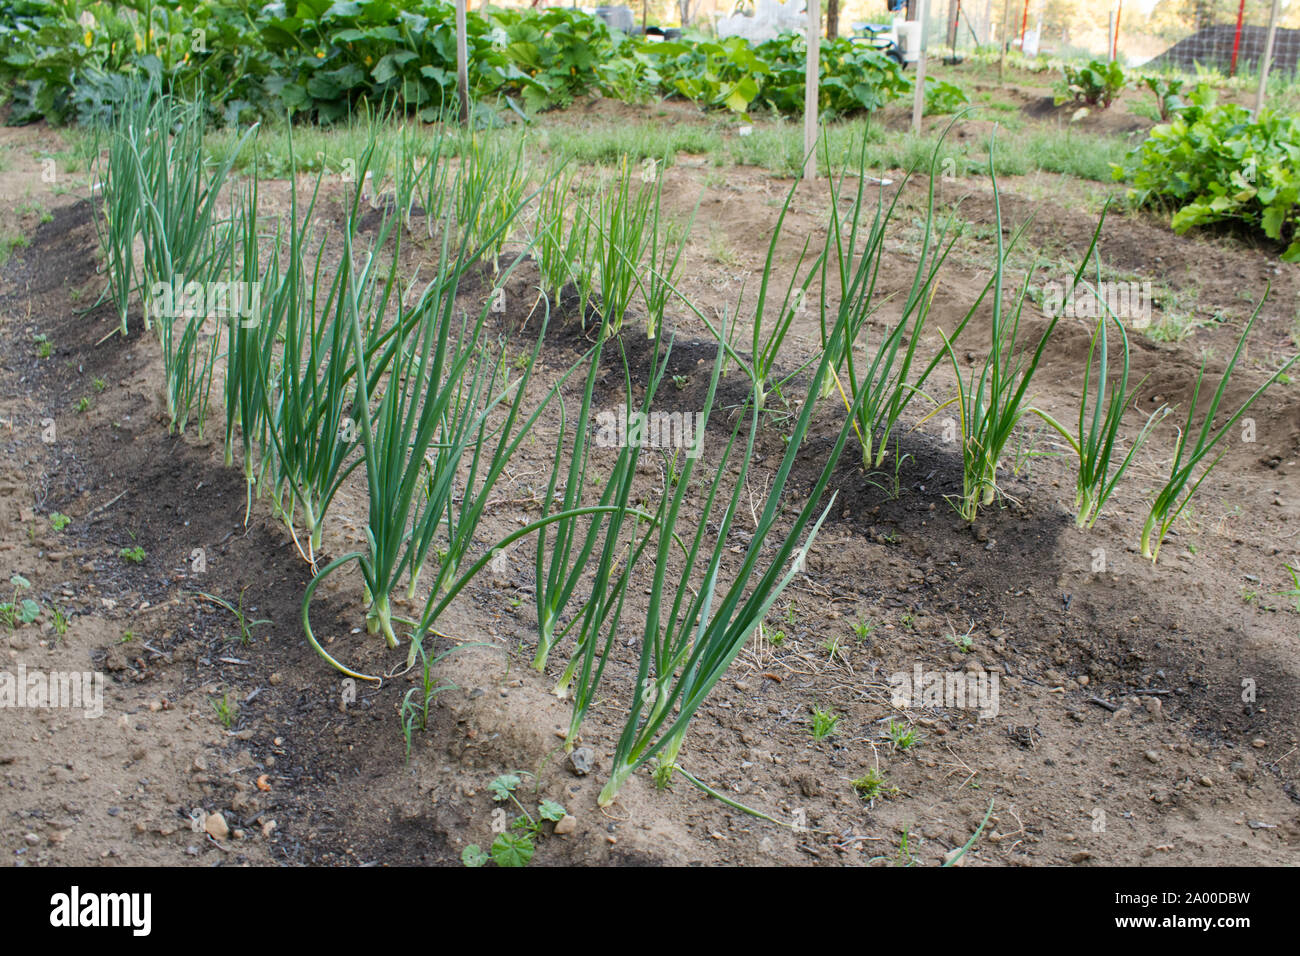 rows of scallions or bunching green onions growing in a vegetable garden Stock Photo